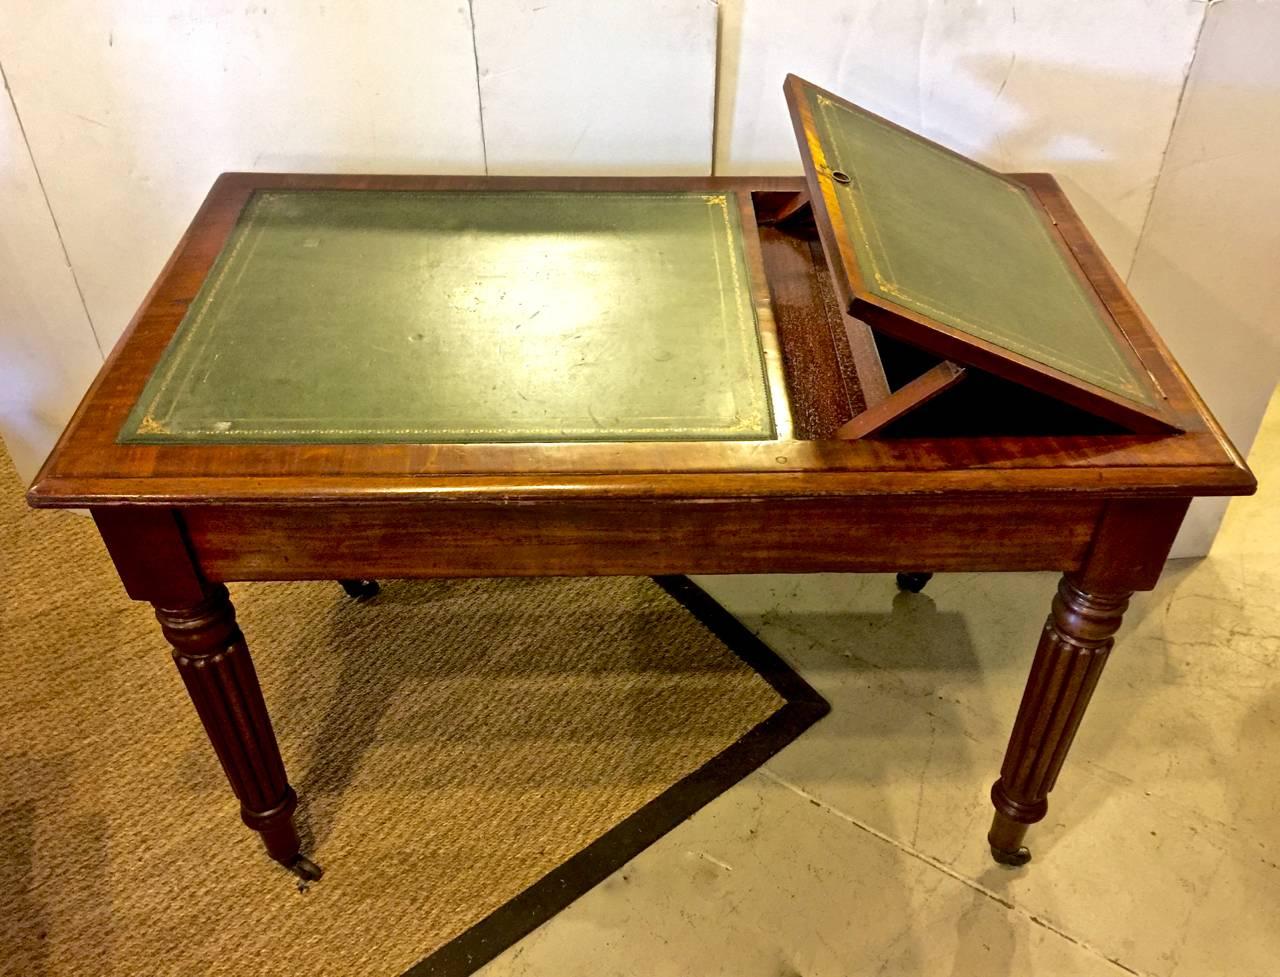 This is an uncommon form of period William IV (circa 1830-1835) desk or writing table that incorporates a book stand at one end. In addition to the book stand, the table has two side drawers at either end. The leather is an old replacement and the